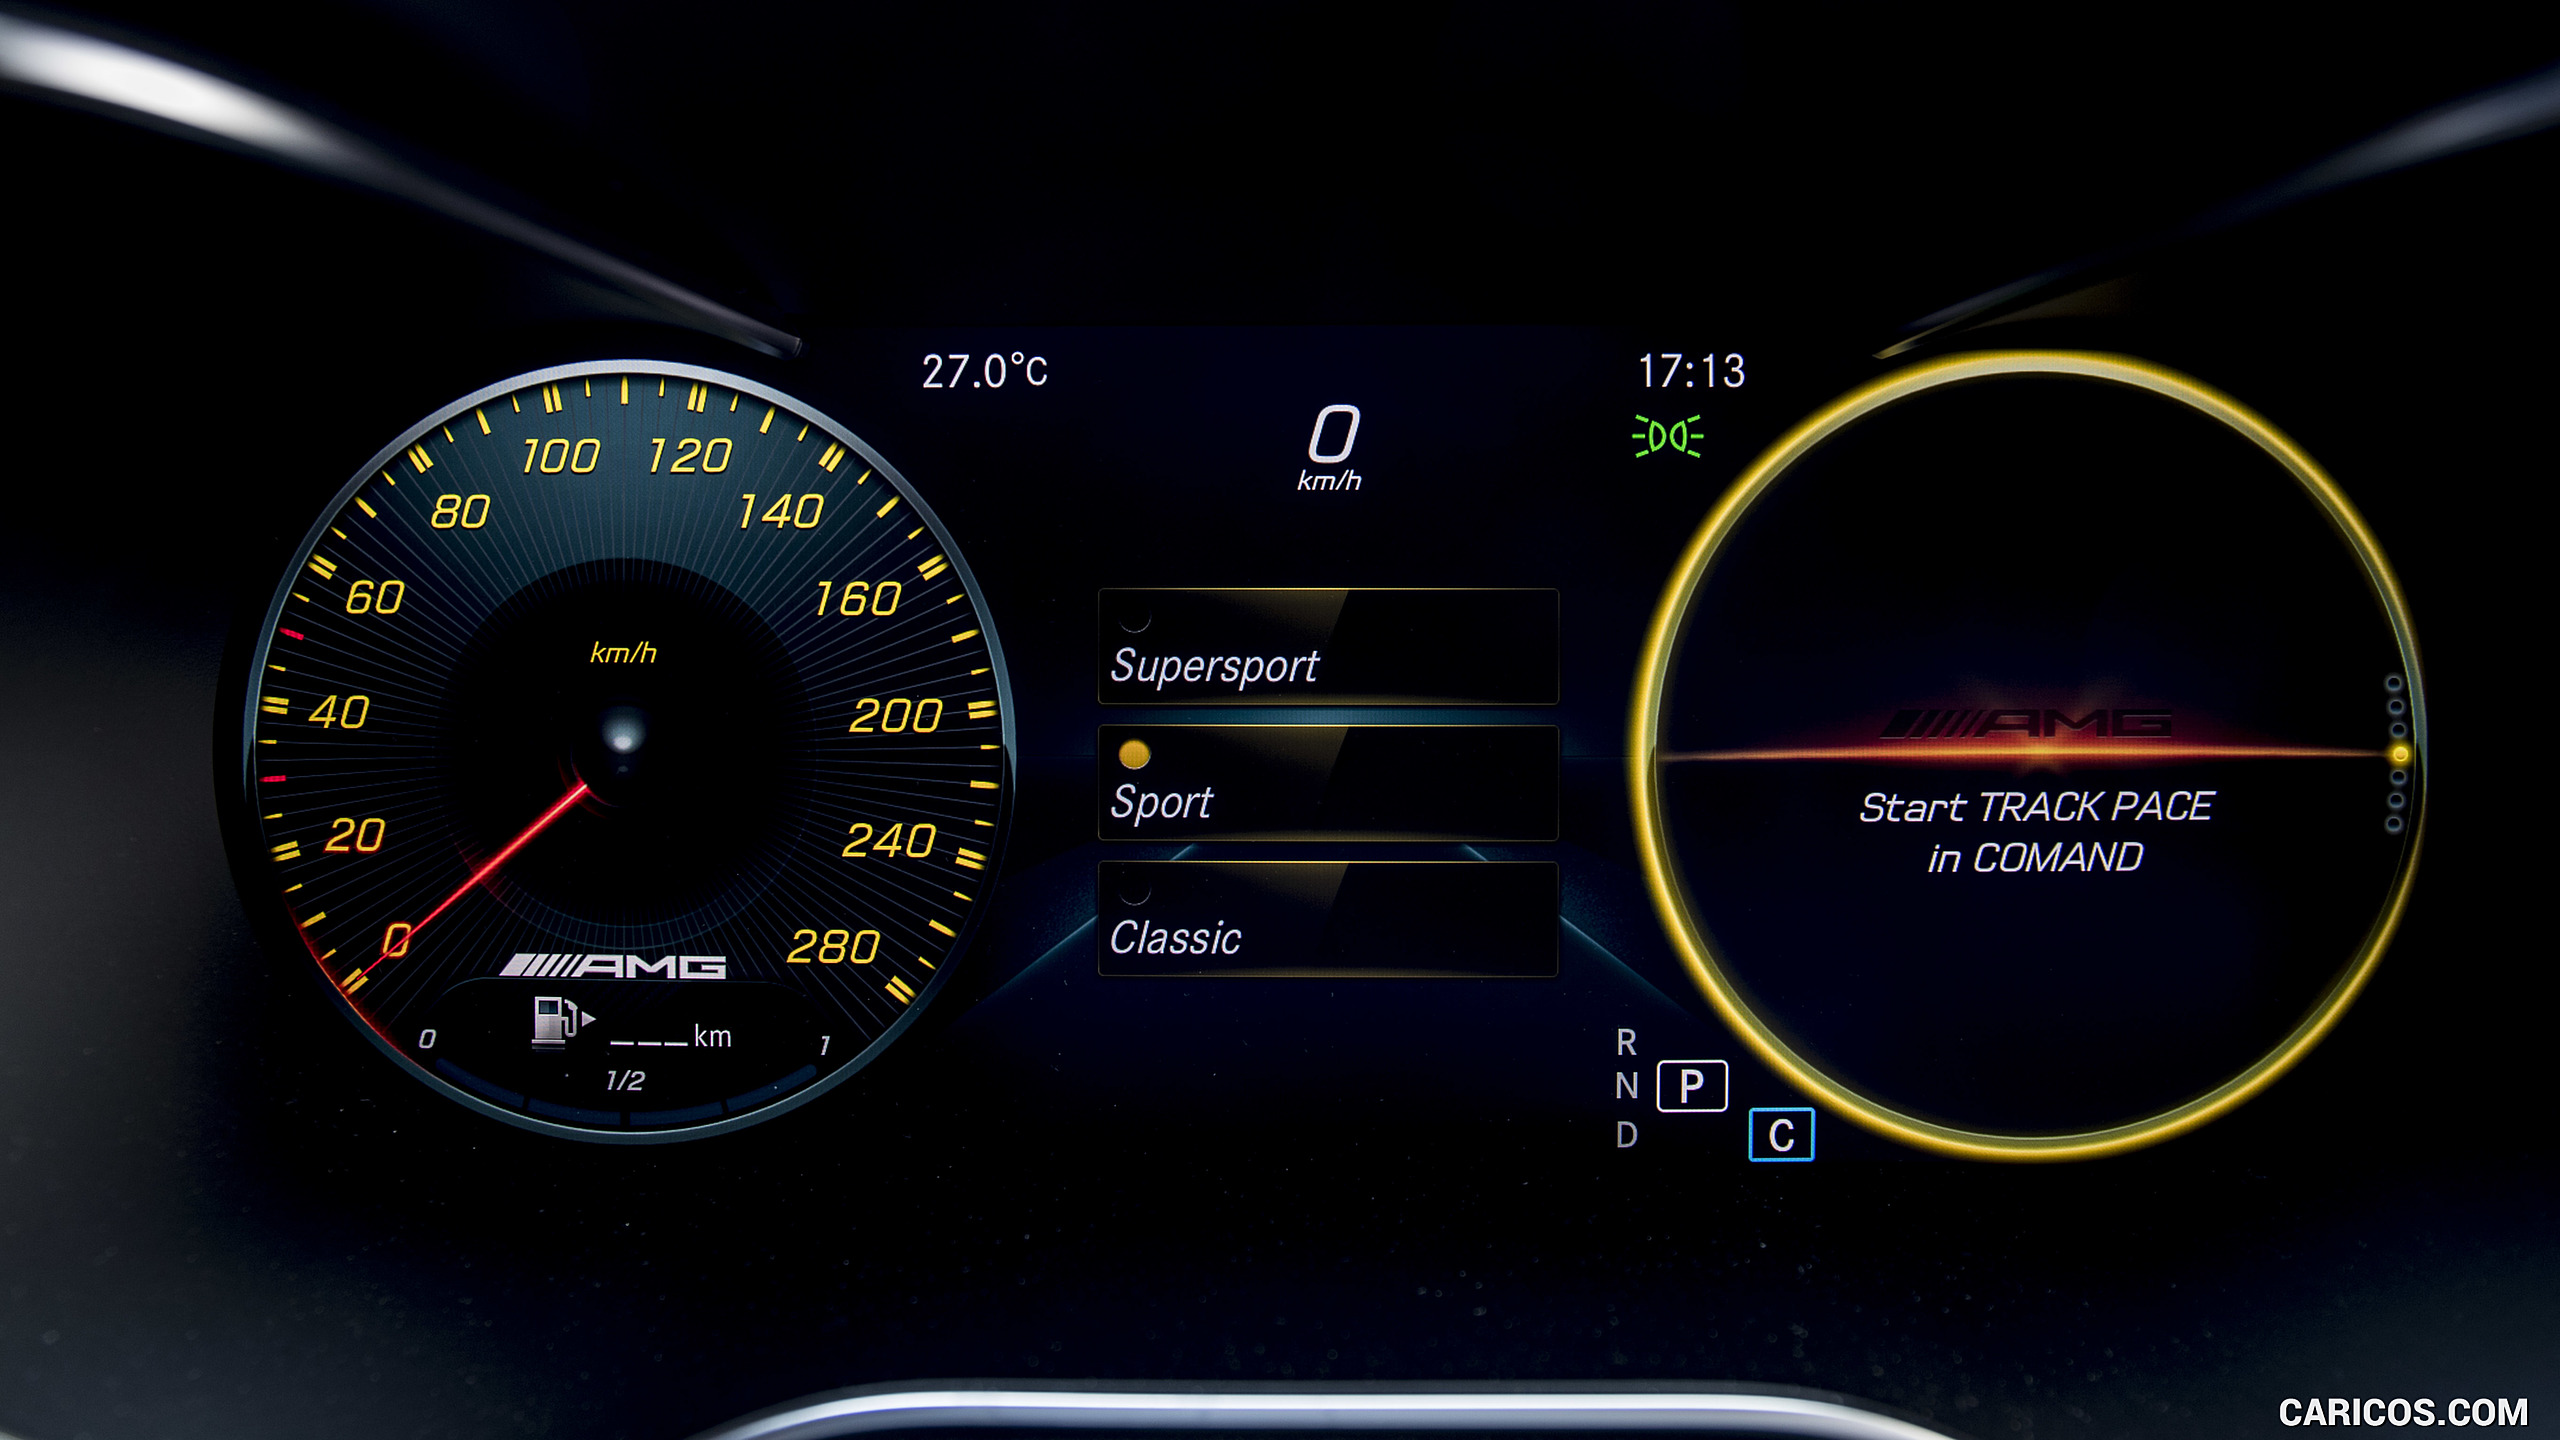 2019 Mercedes-AMG C43 4MATIC Coupe - Digital Instrument Cluster, #101 of 184